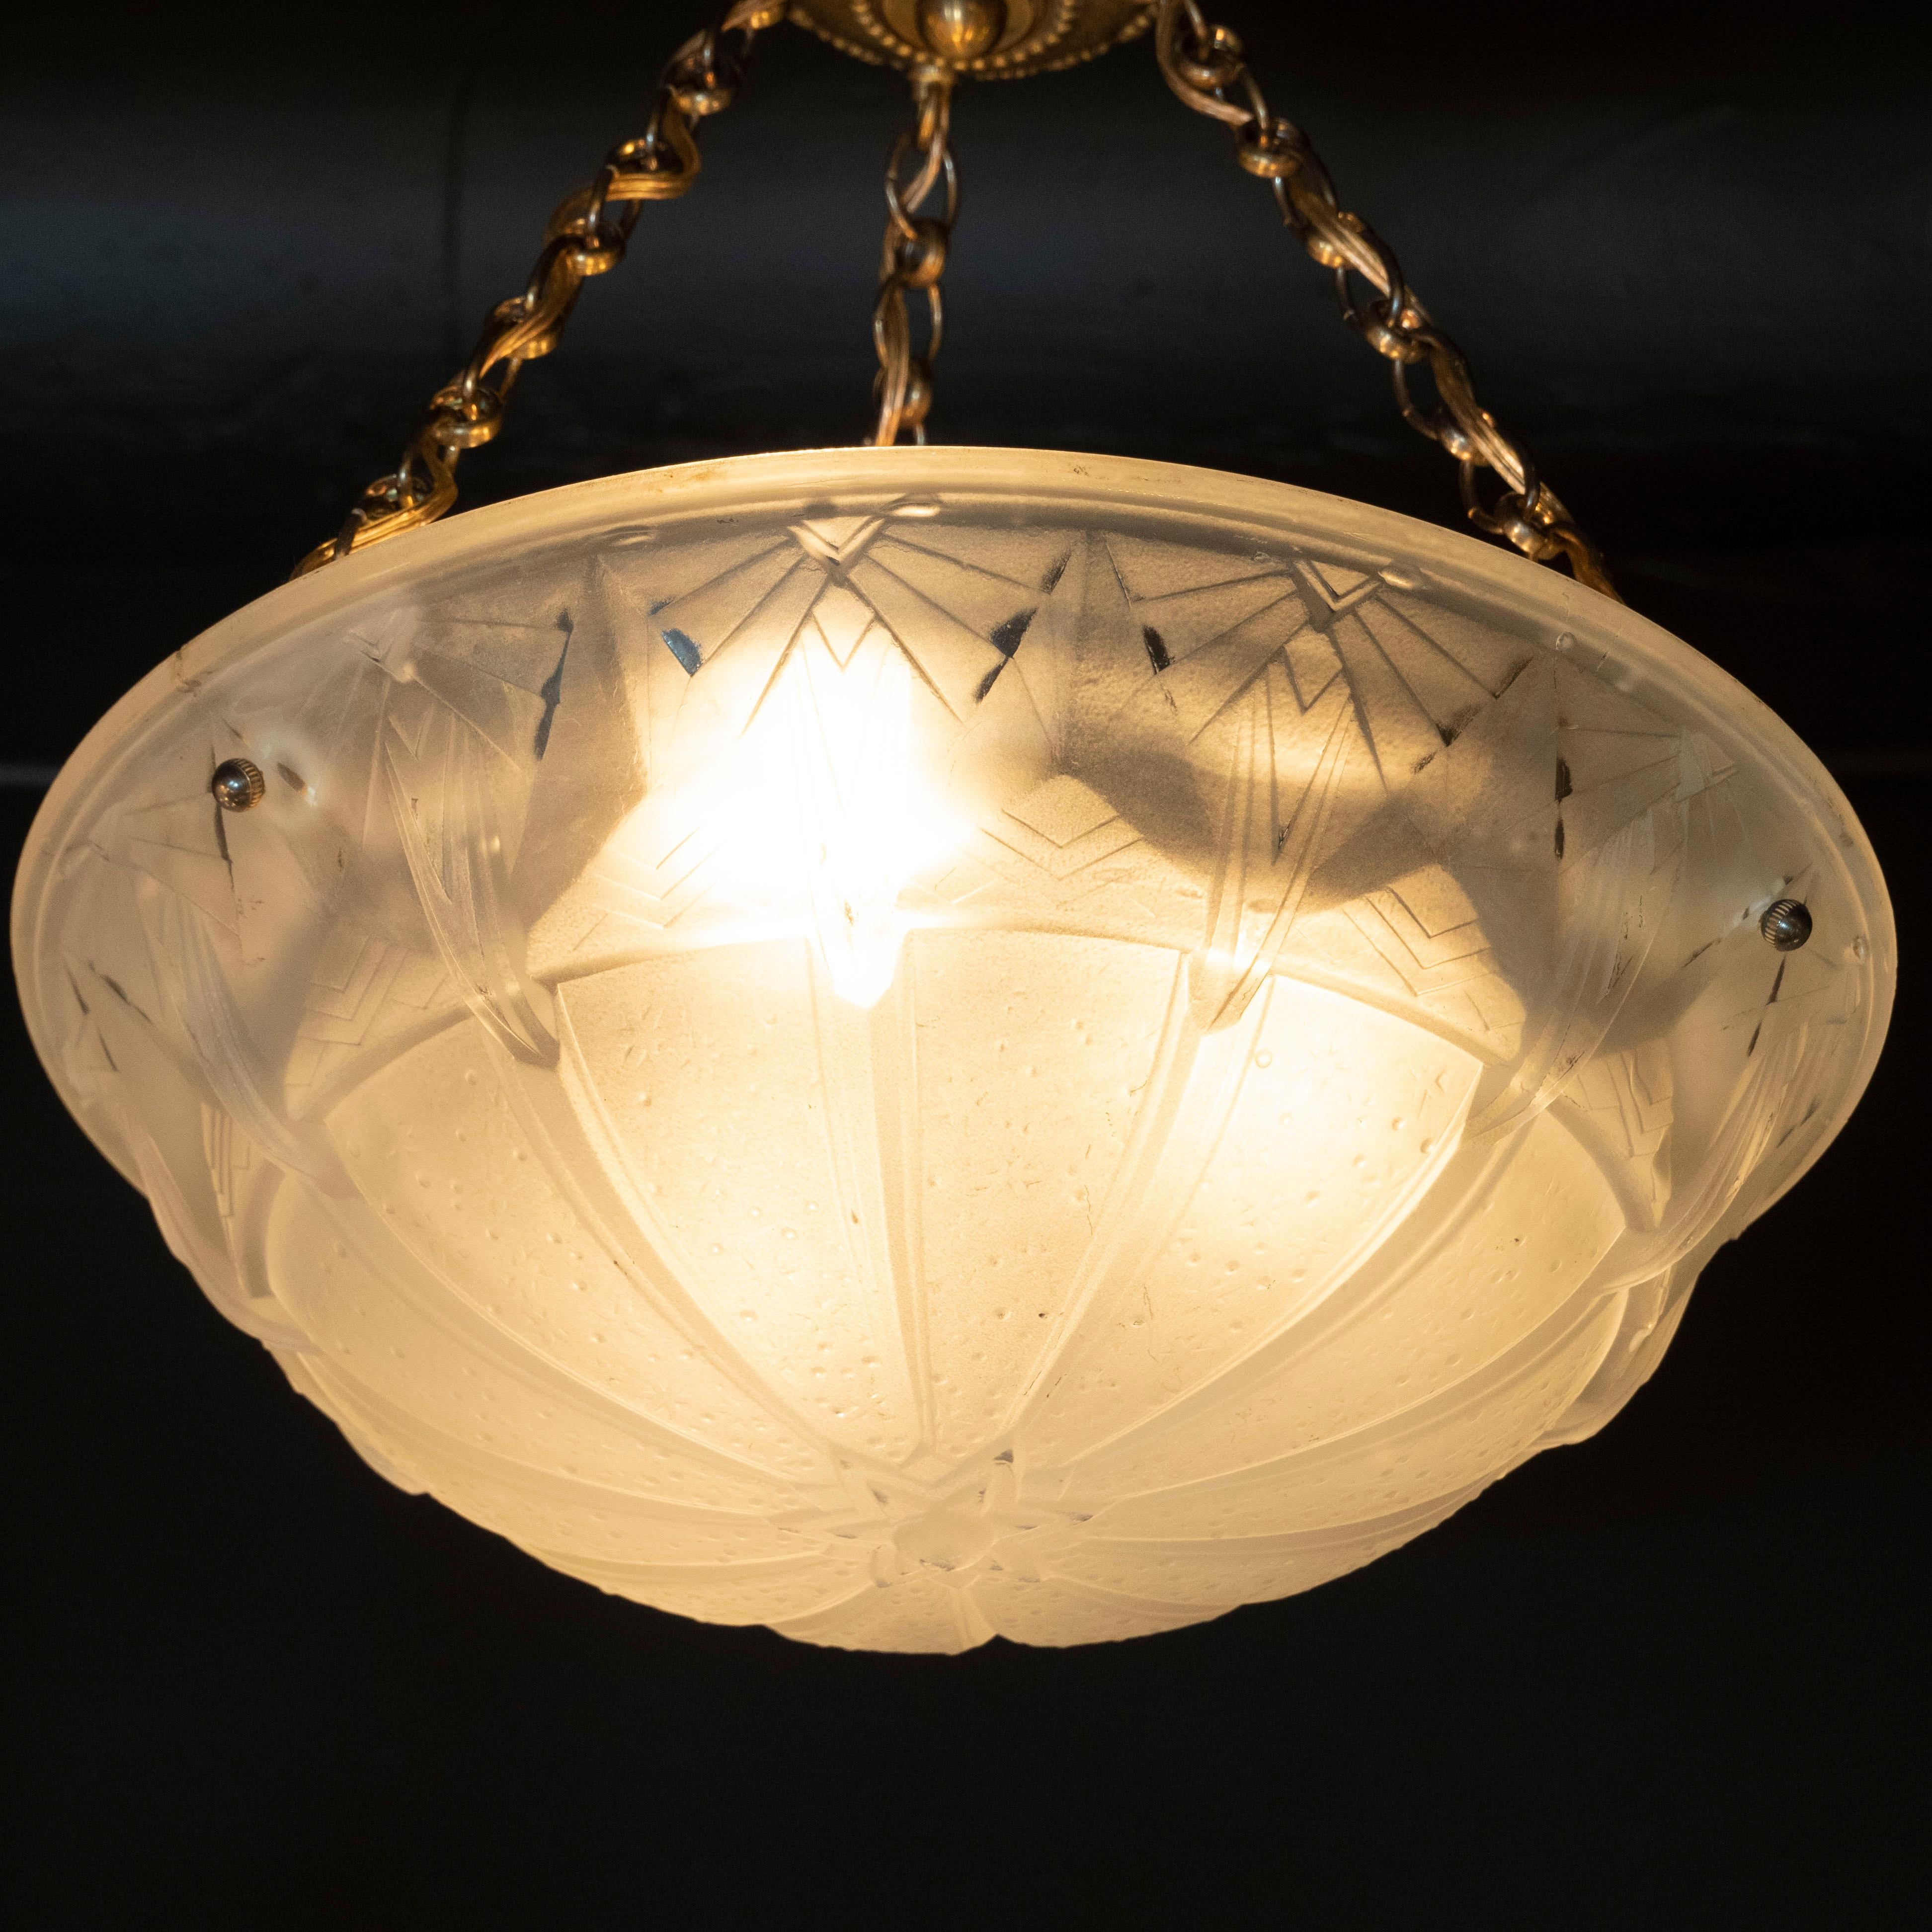 This elegant Art Deco pendant was handblown in the studios of Muller Frerès in France, circa 1935. It features a convex domed circular body with intricate and iconically Art Deco geometric designs inscribed throughout. The glass shade affixes to the